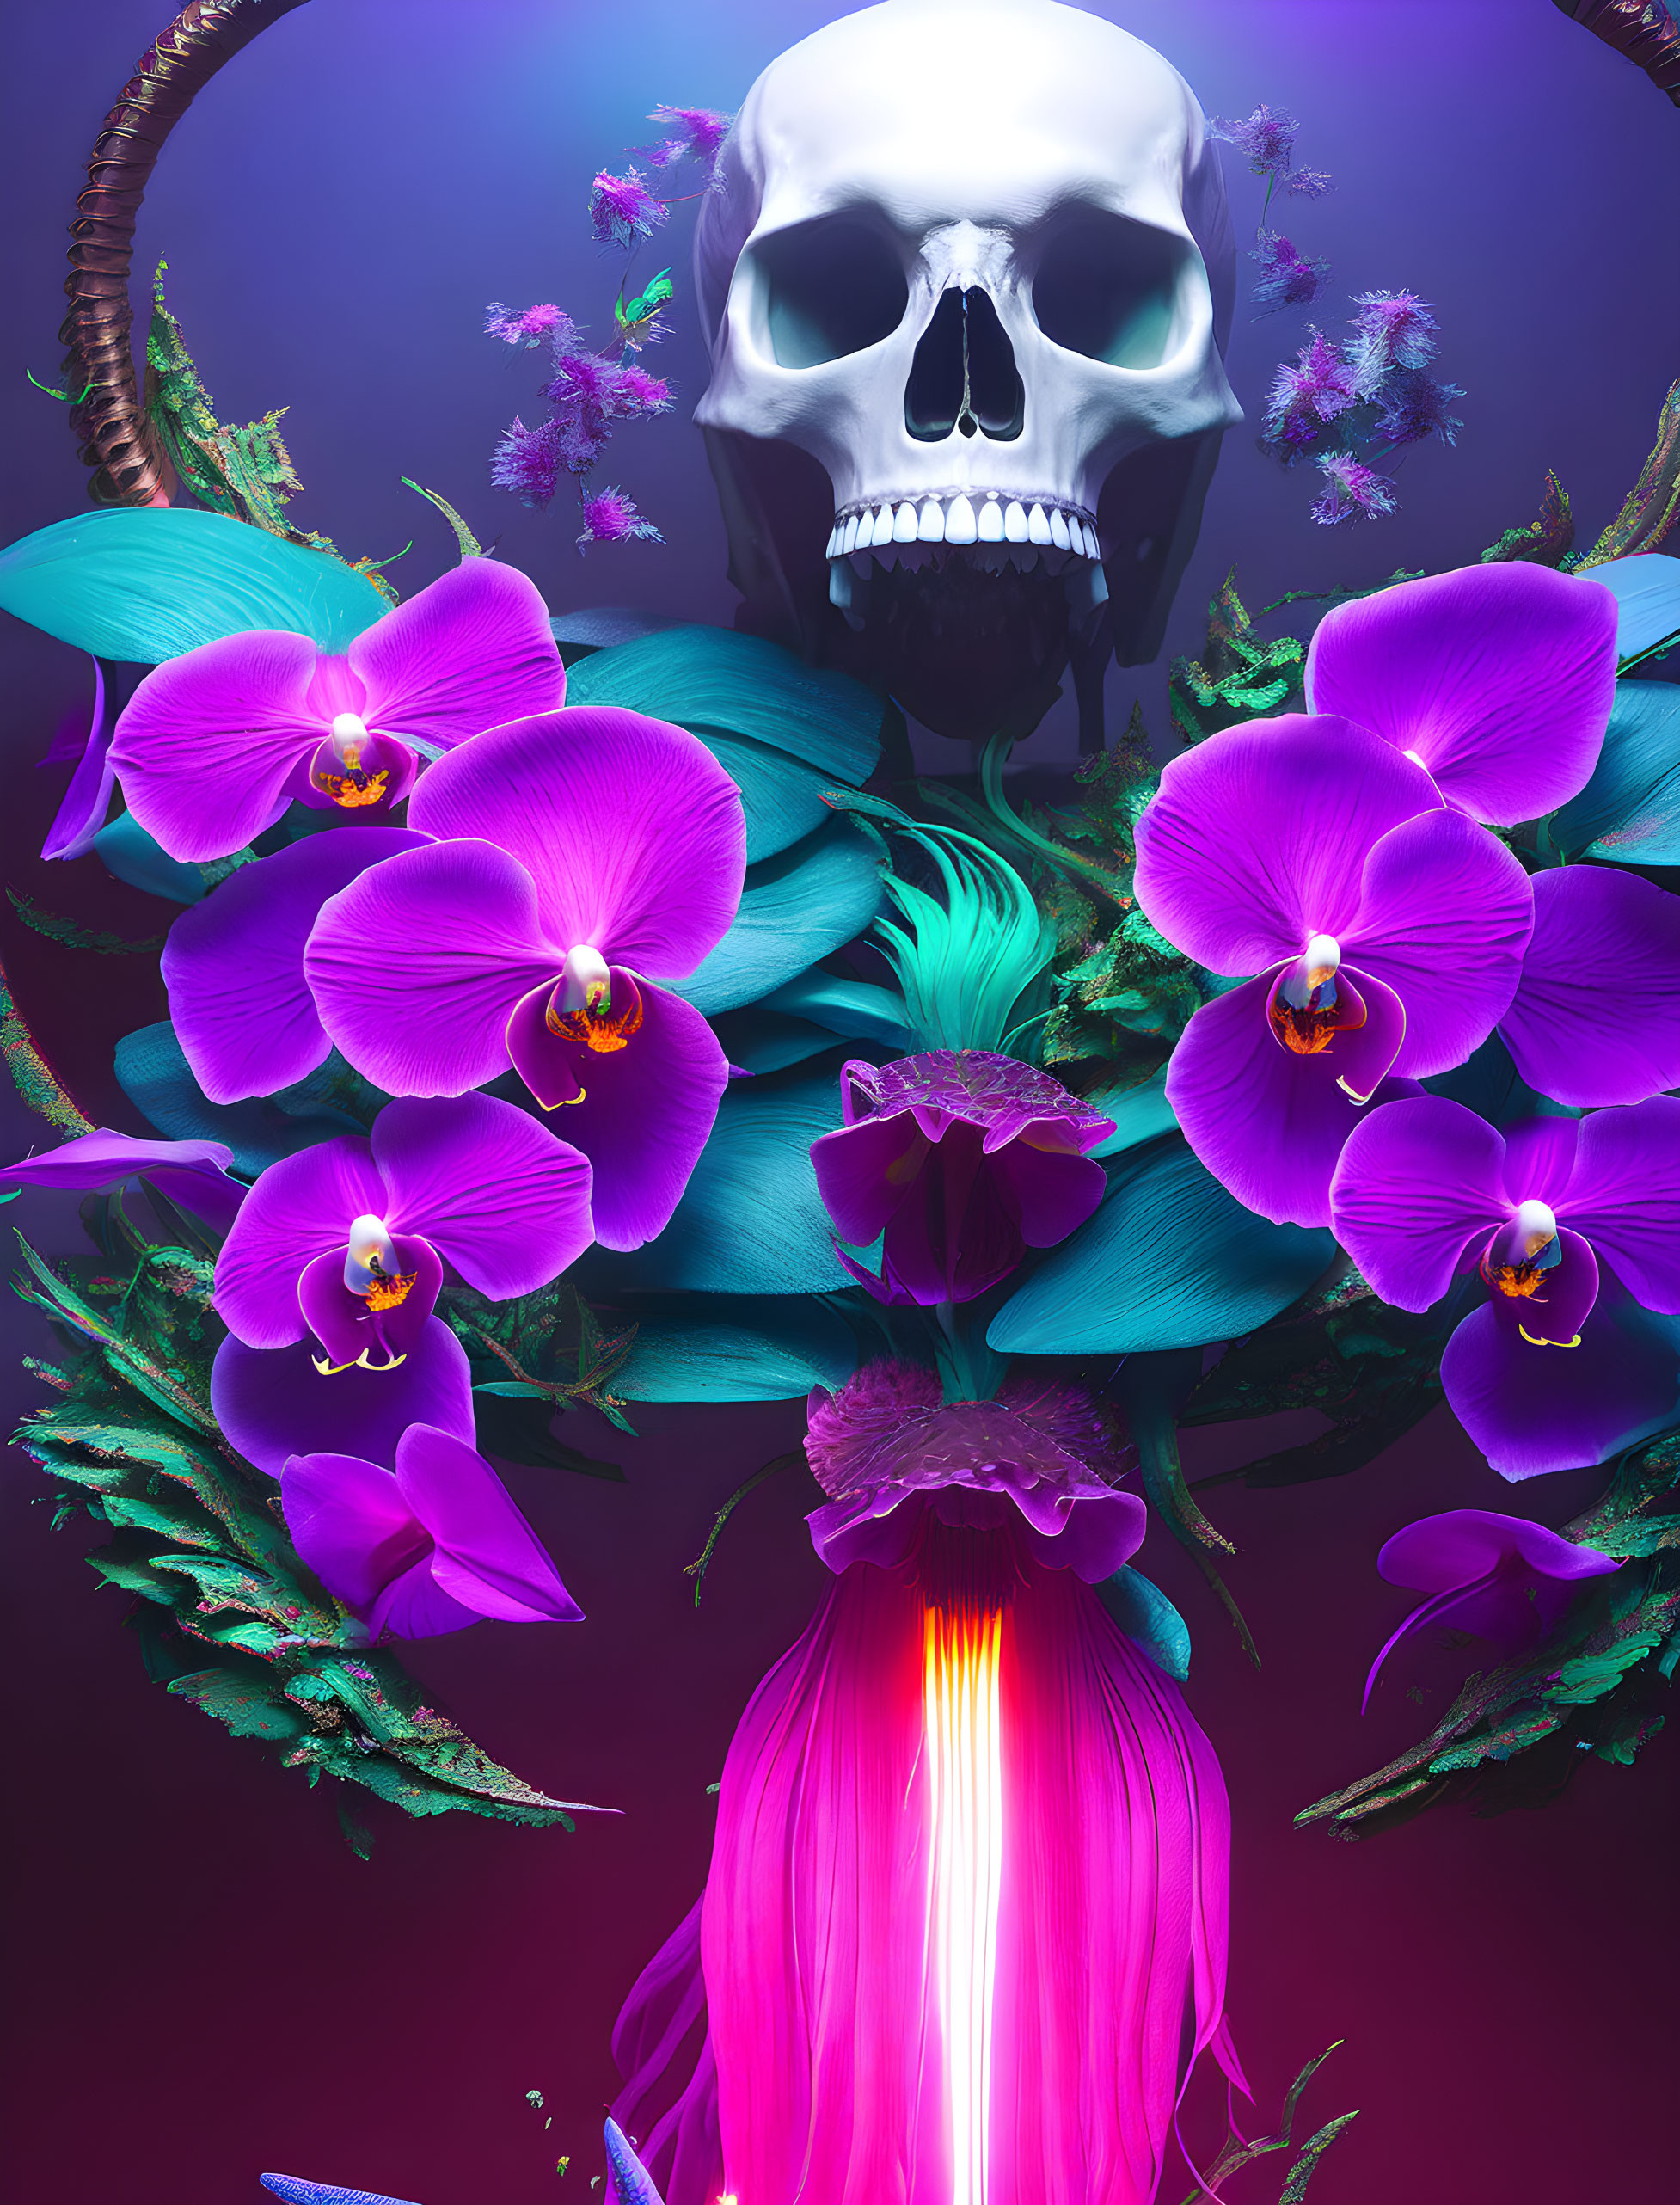 Large Skull on Vibrant Purple Orchids with Pink Beam on Mystic Background